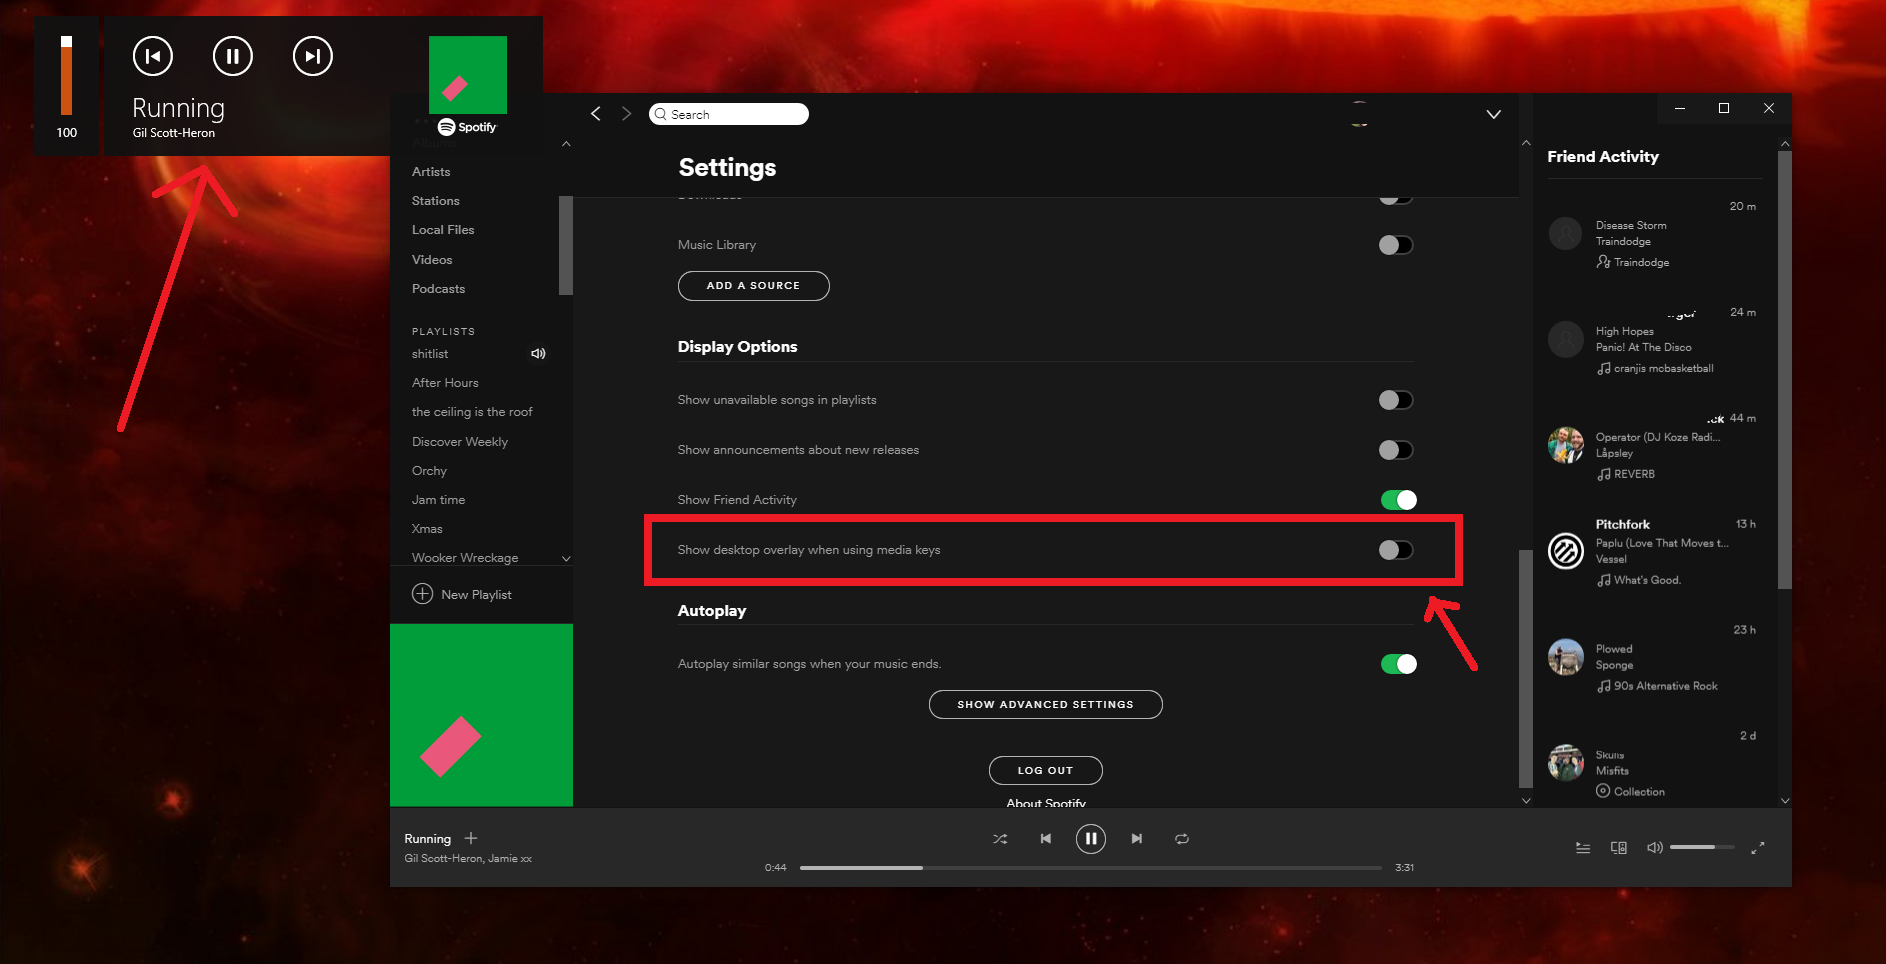 Media Overlay keeps reappearing - Page 2 - The Spotify Community